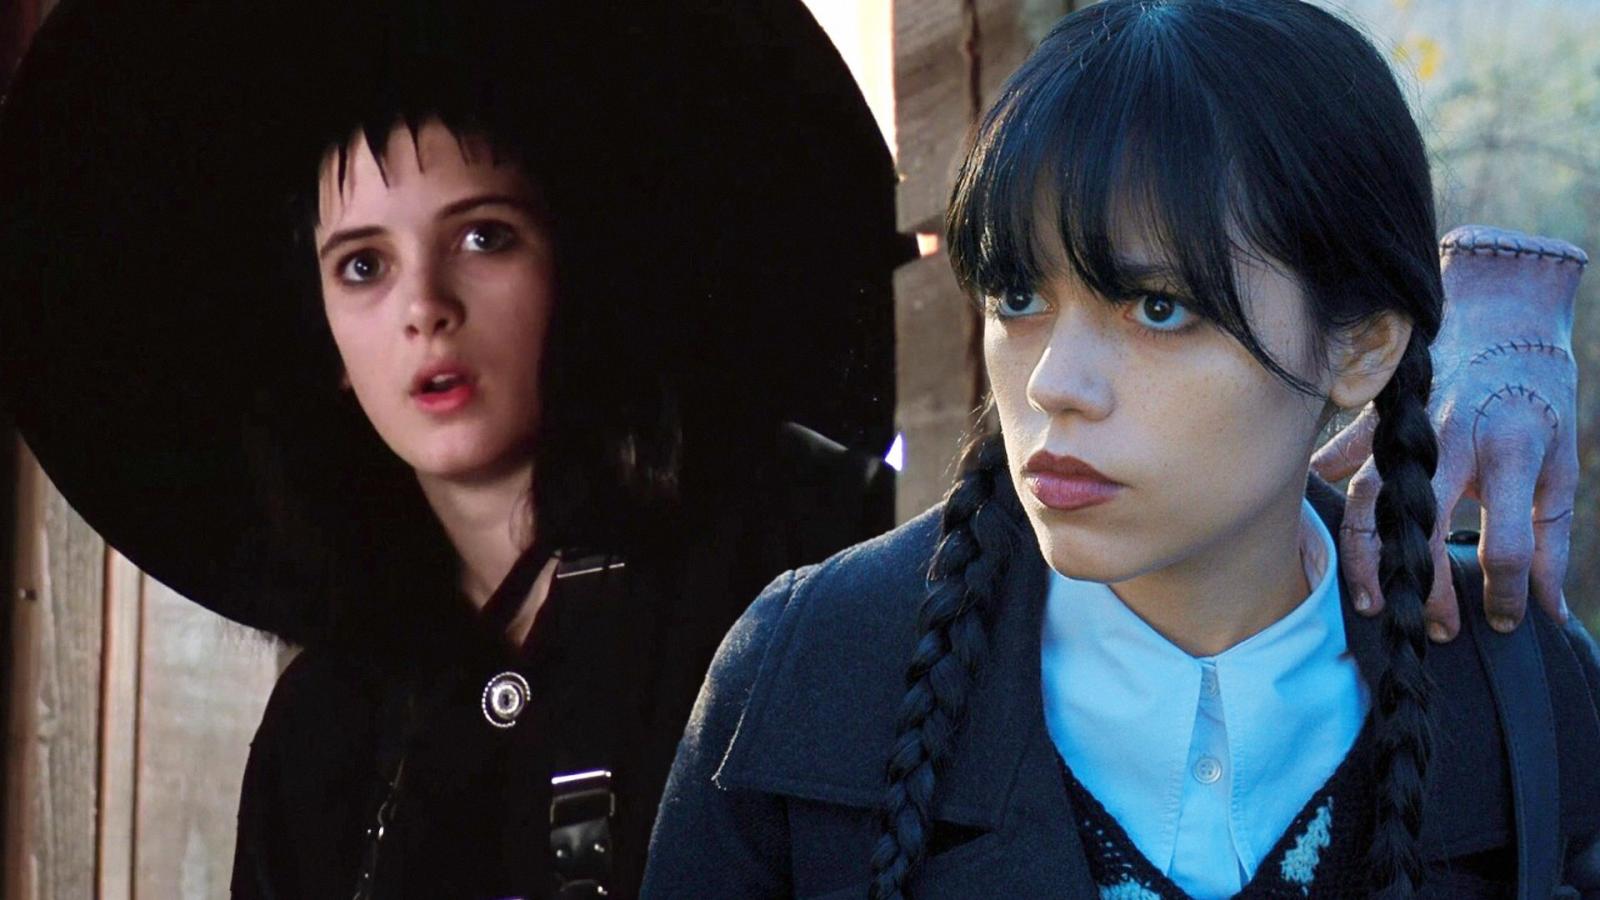 Who Will Wednesday's Jenna Ortega Play in the Beetlejuice Sequel? - image 1